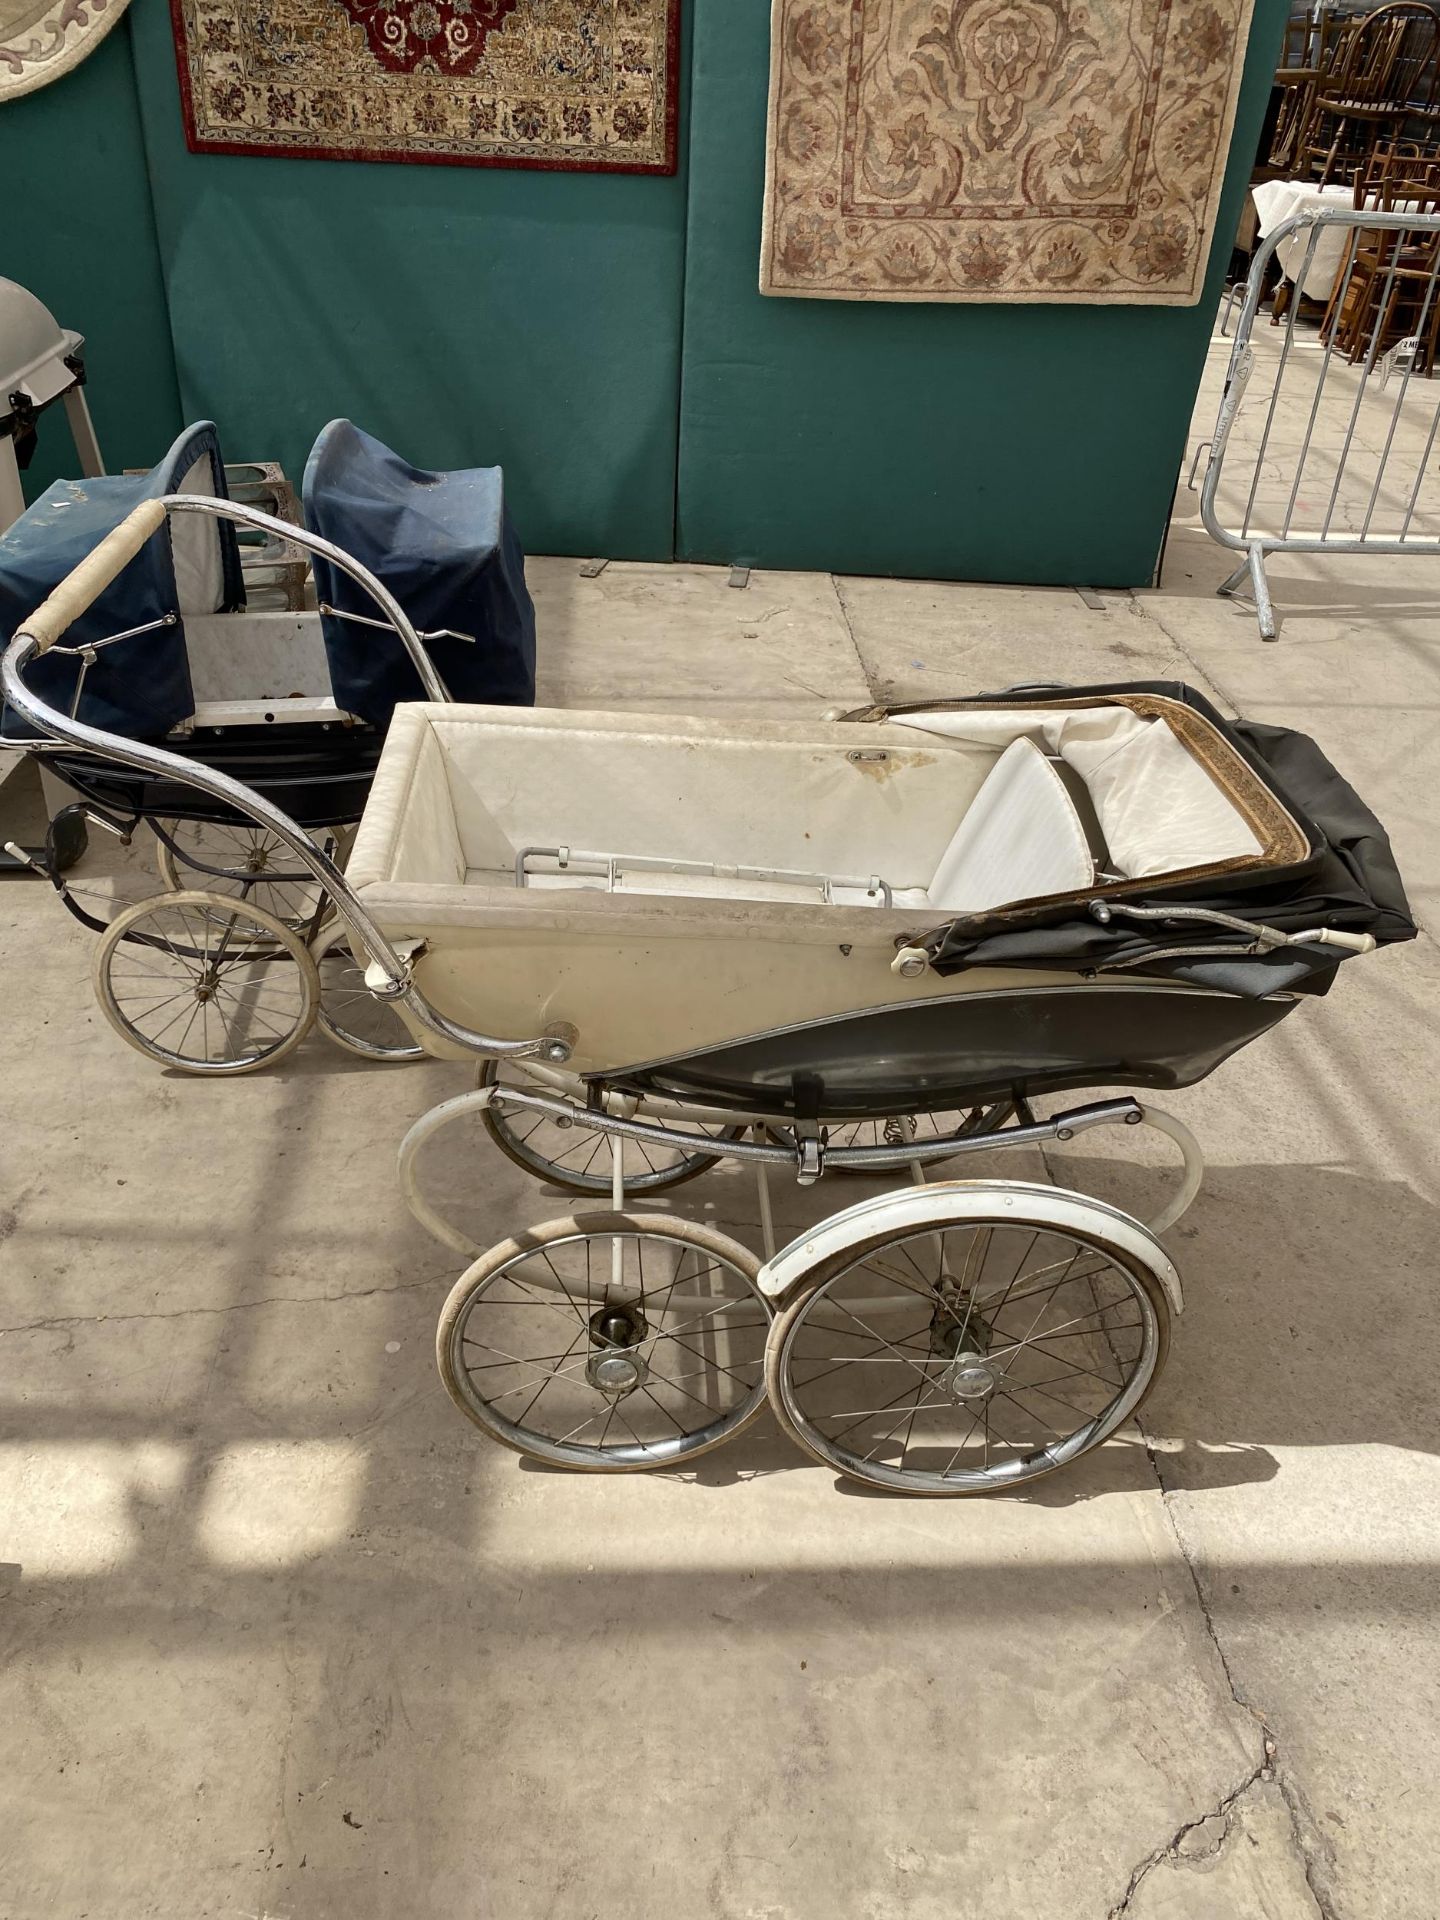 TWO SILVER CROSS STYLE VINTAGE PRAMS - Image 3 of 3